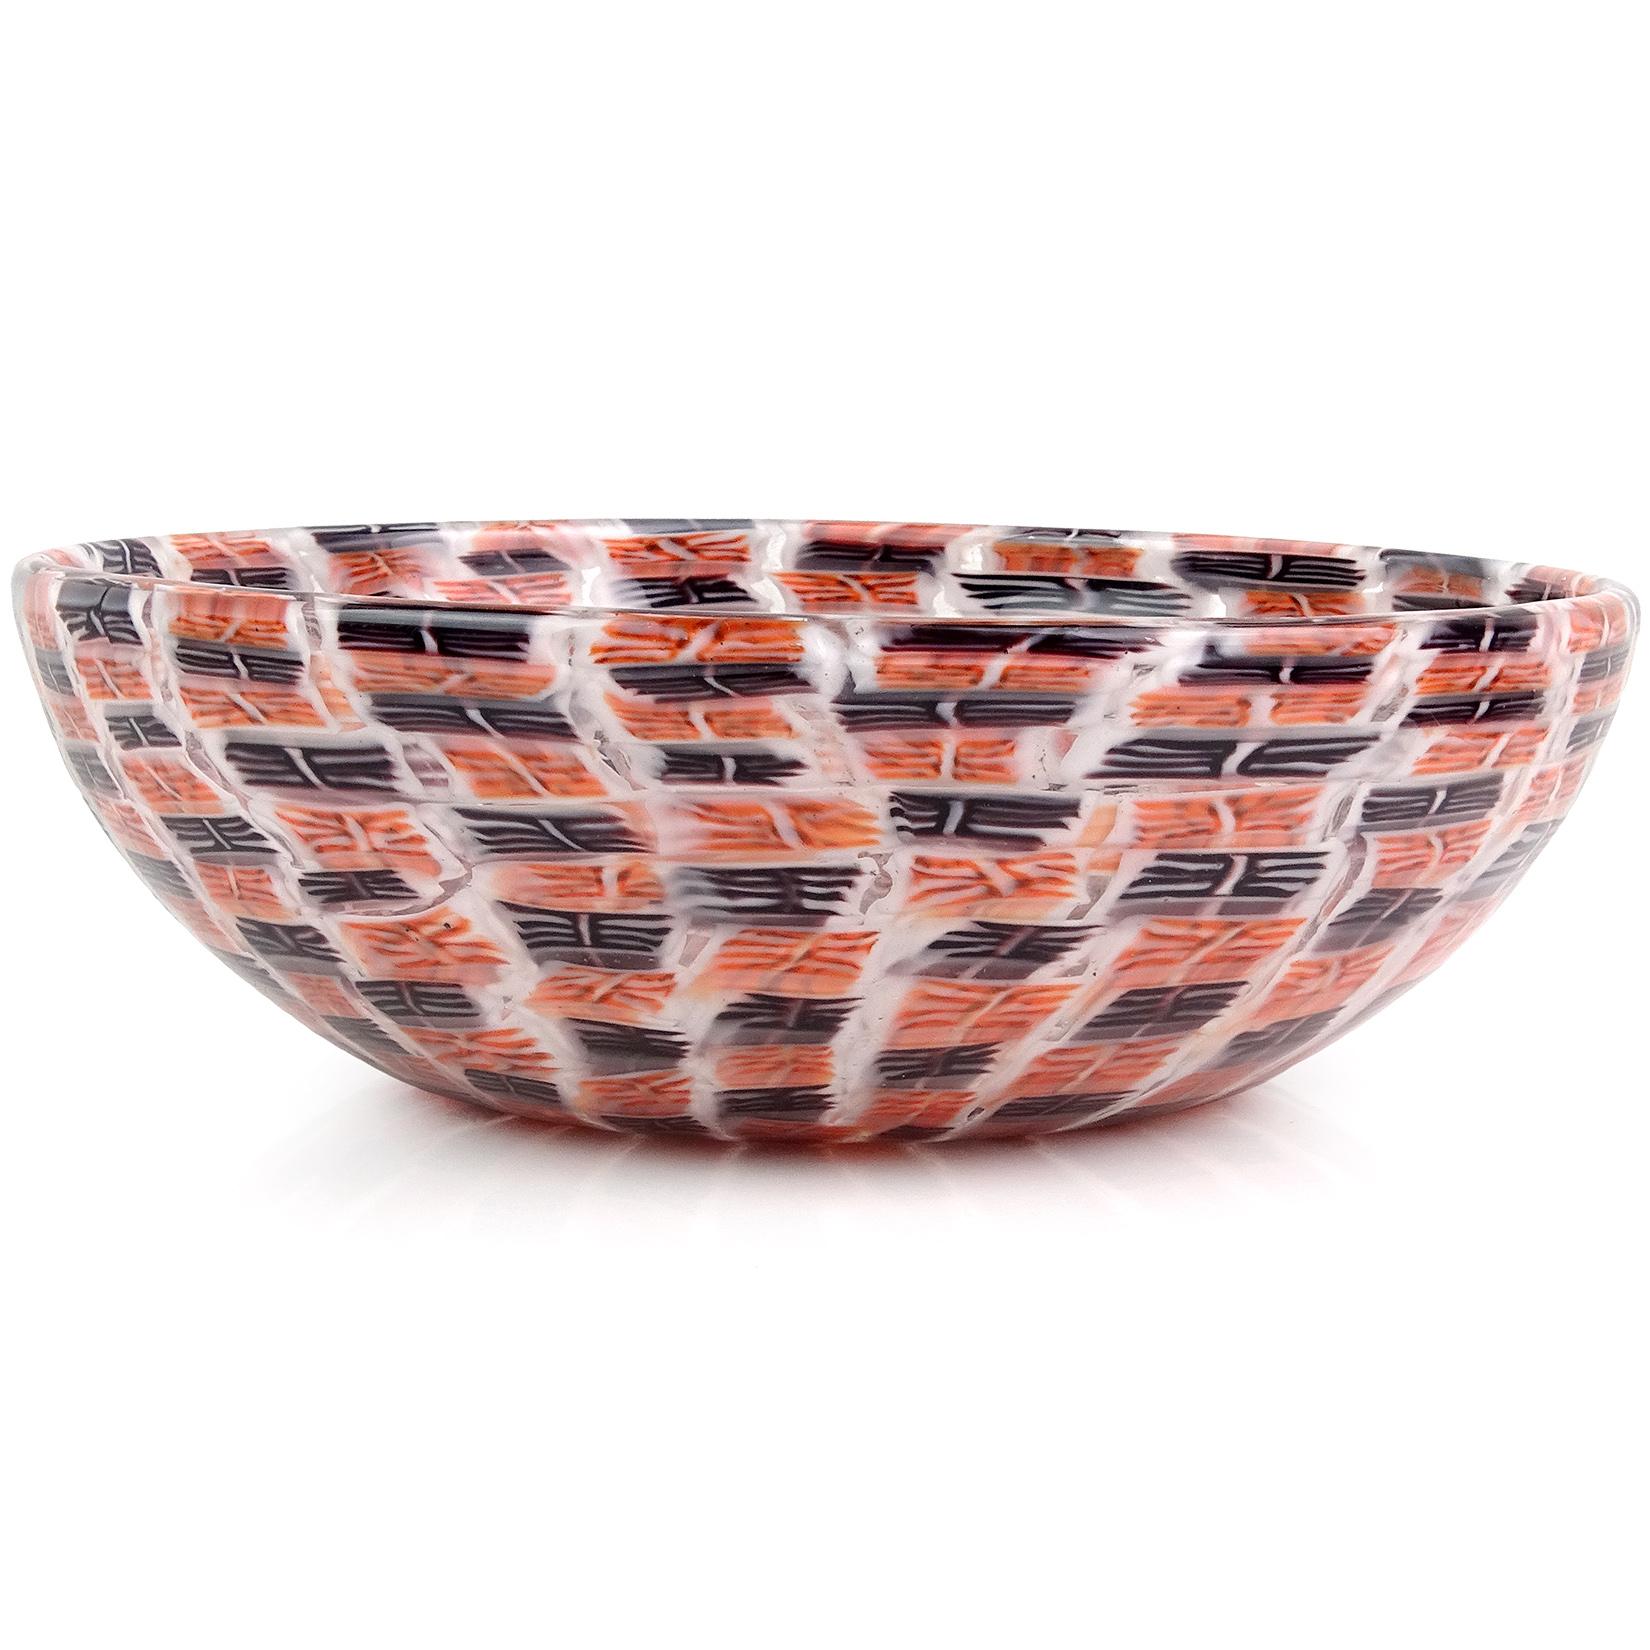 Beautiful, large and rare, vintage Murano hand blown mosaic white, black and orange murrines Italian art glass bowl. Documented to designer and painter Riccardo Licata for Venini, circa 1950s. It has an intricate murine design, stacked and